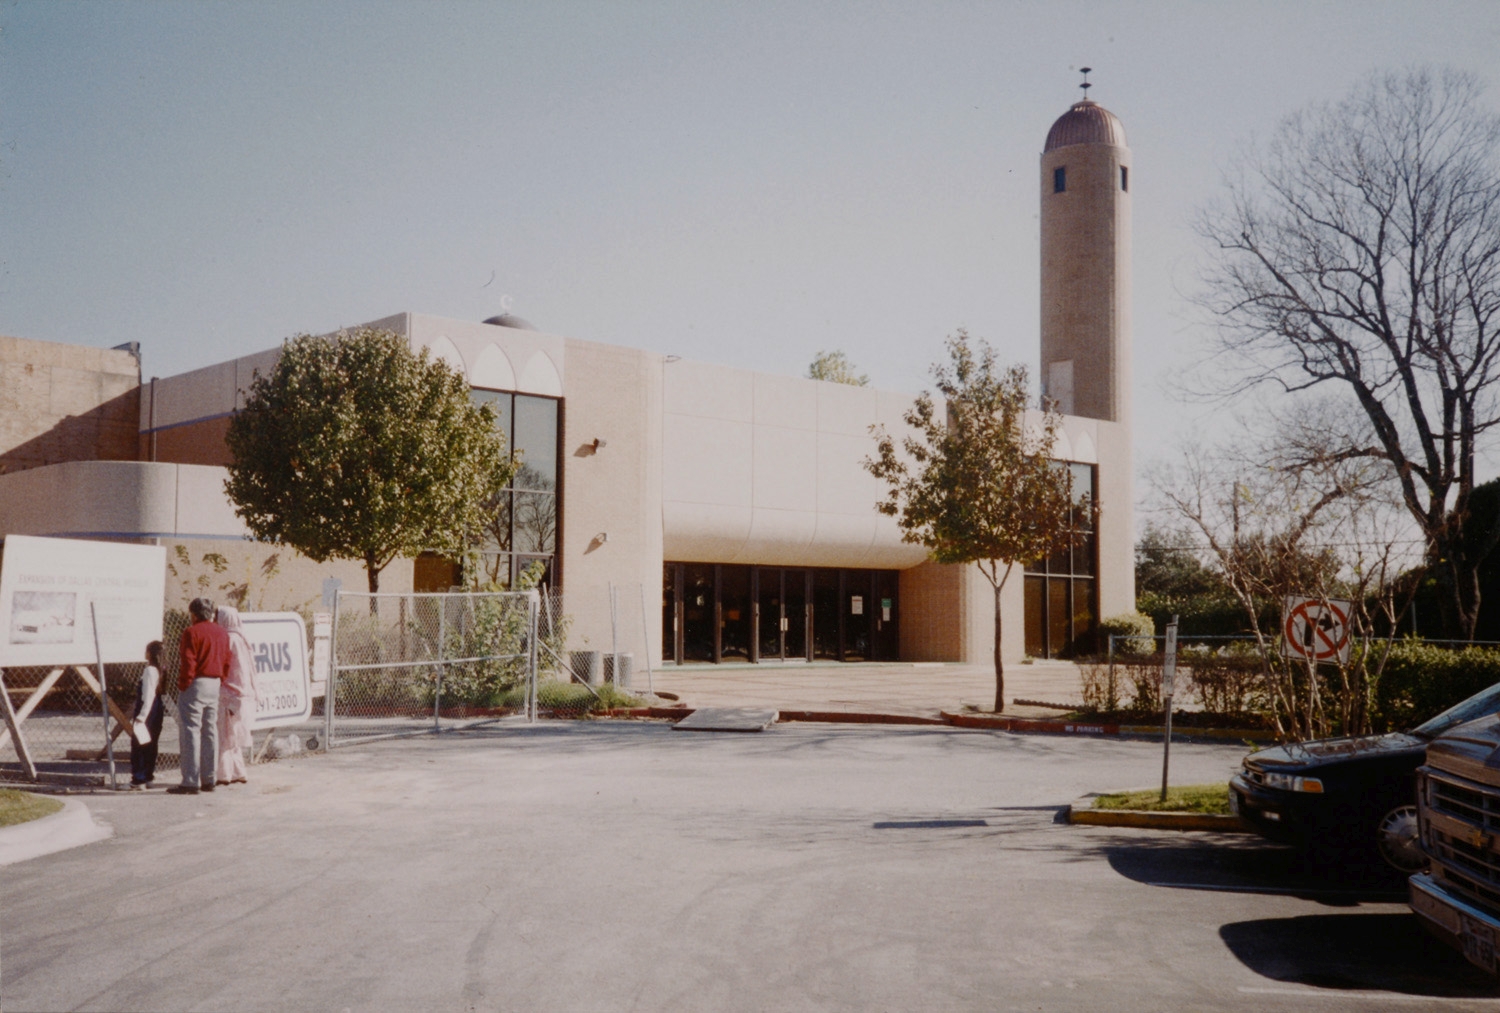 Original mosque building with construction for mosque expansion at left